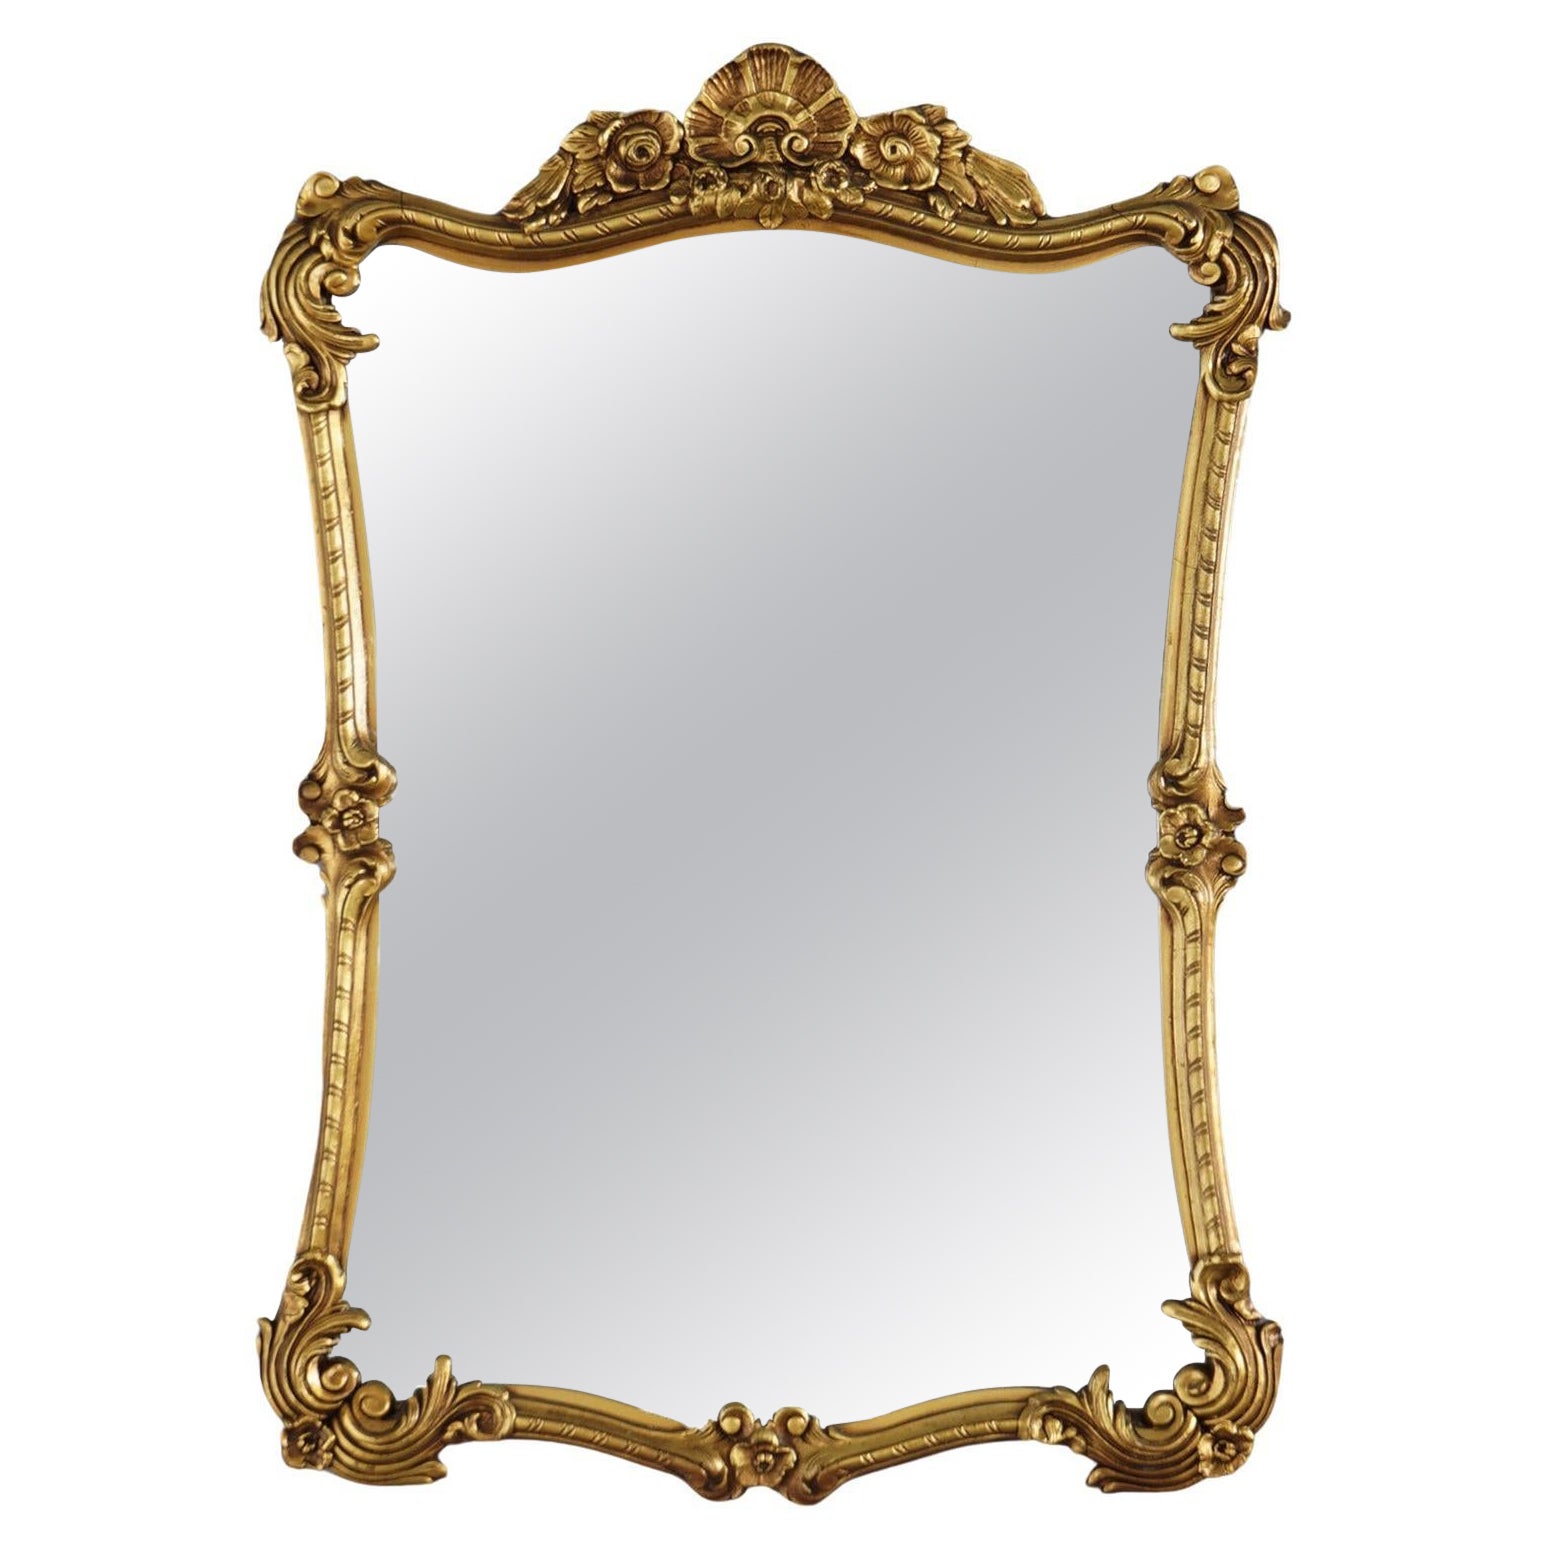 Antique French Giltwood Wall Mirror with Foliate & Gadroon Elements Circa 1930 For Sale